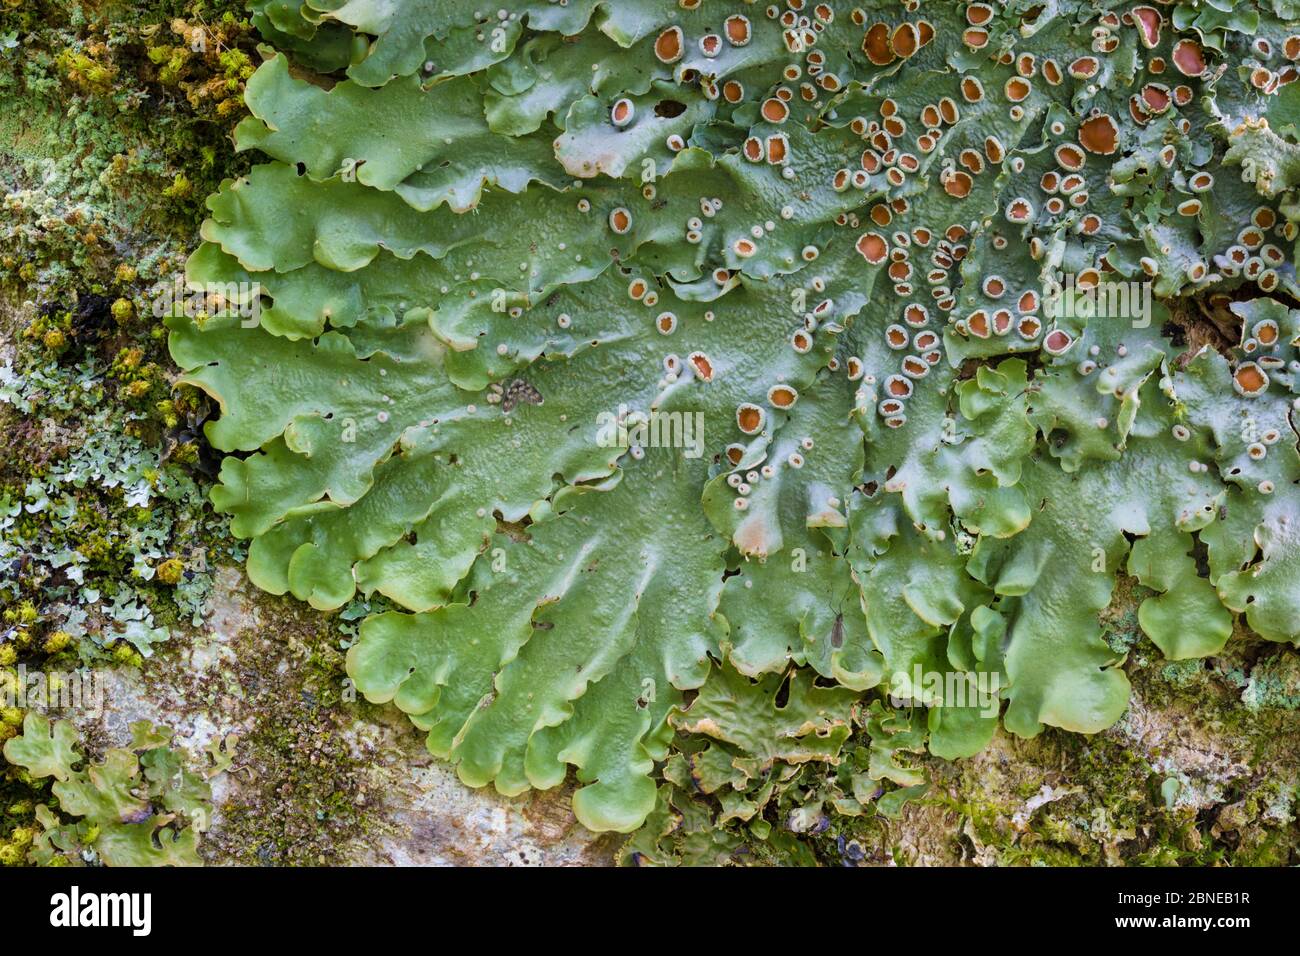 Lichen (Lobaria virens) with mature apothecia (or fruiting body) growing on a sycamore tree trunk. Isle of Mull, Scotland, UK. June. Stock Photo